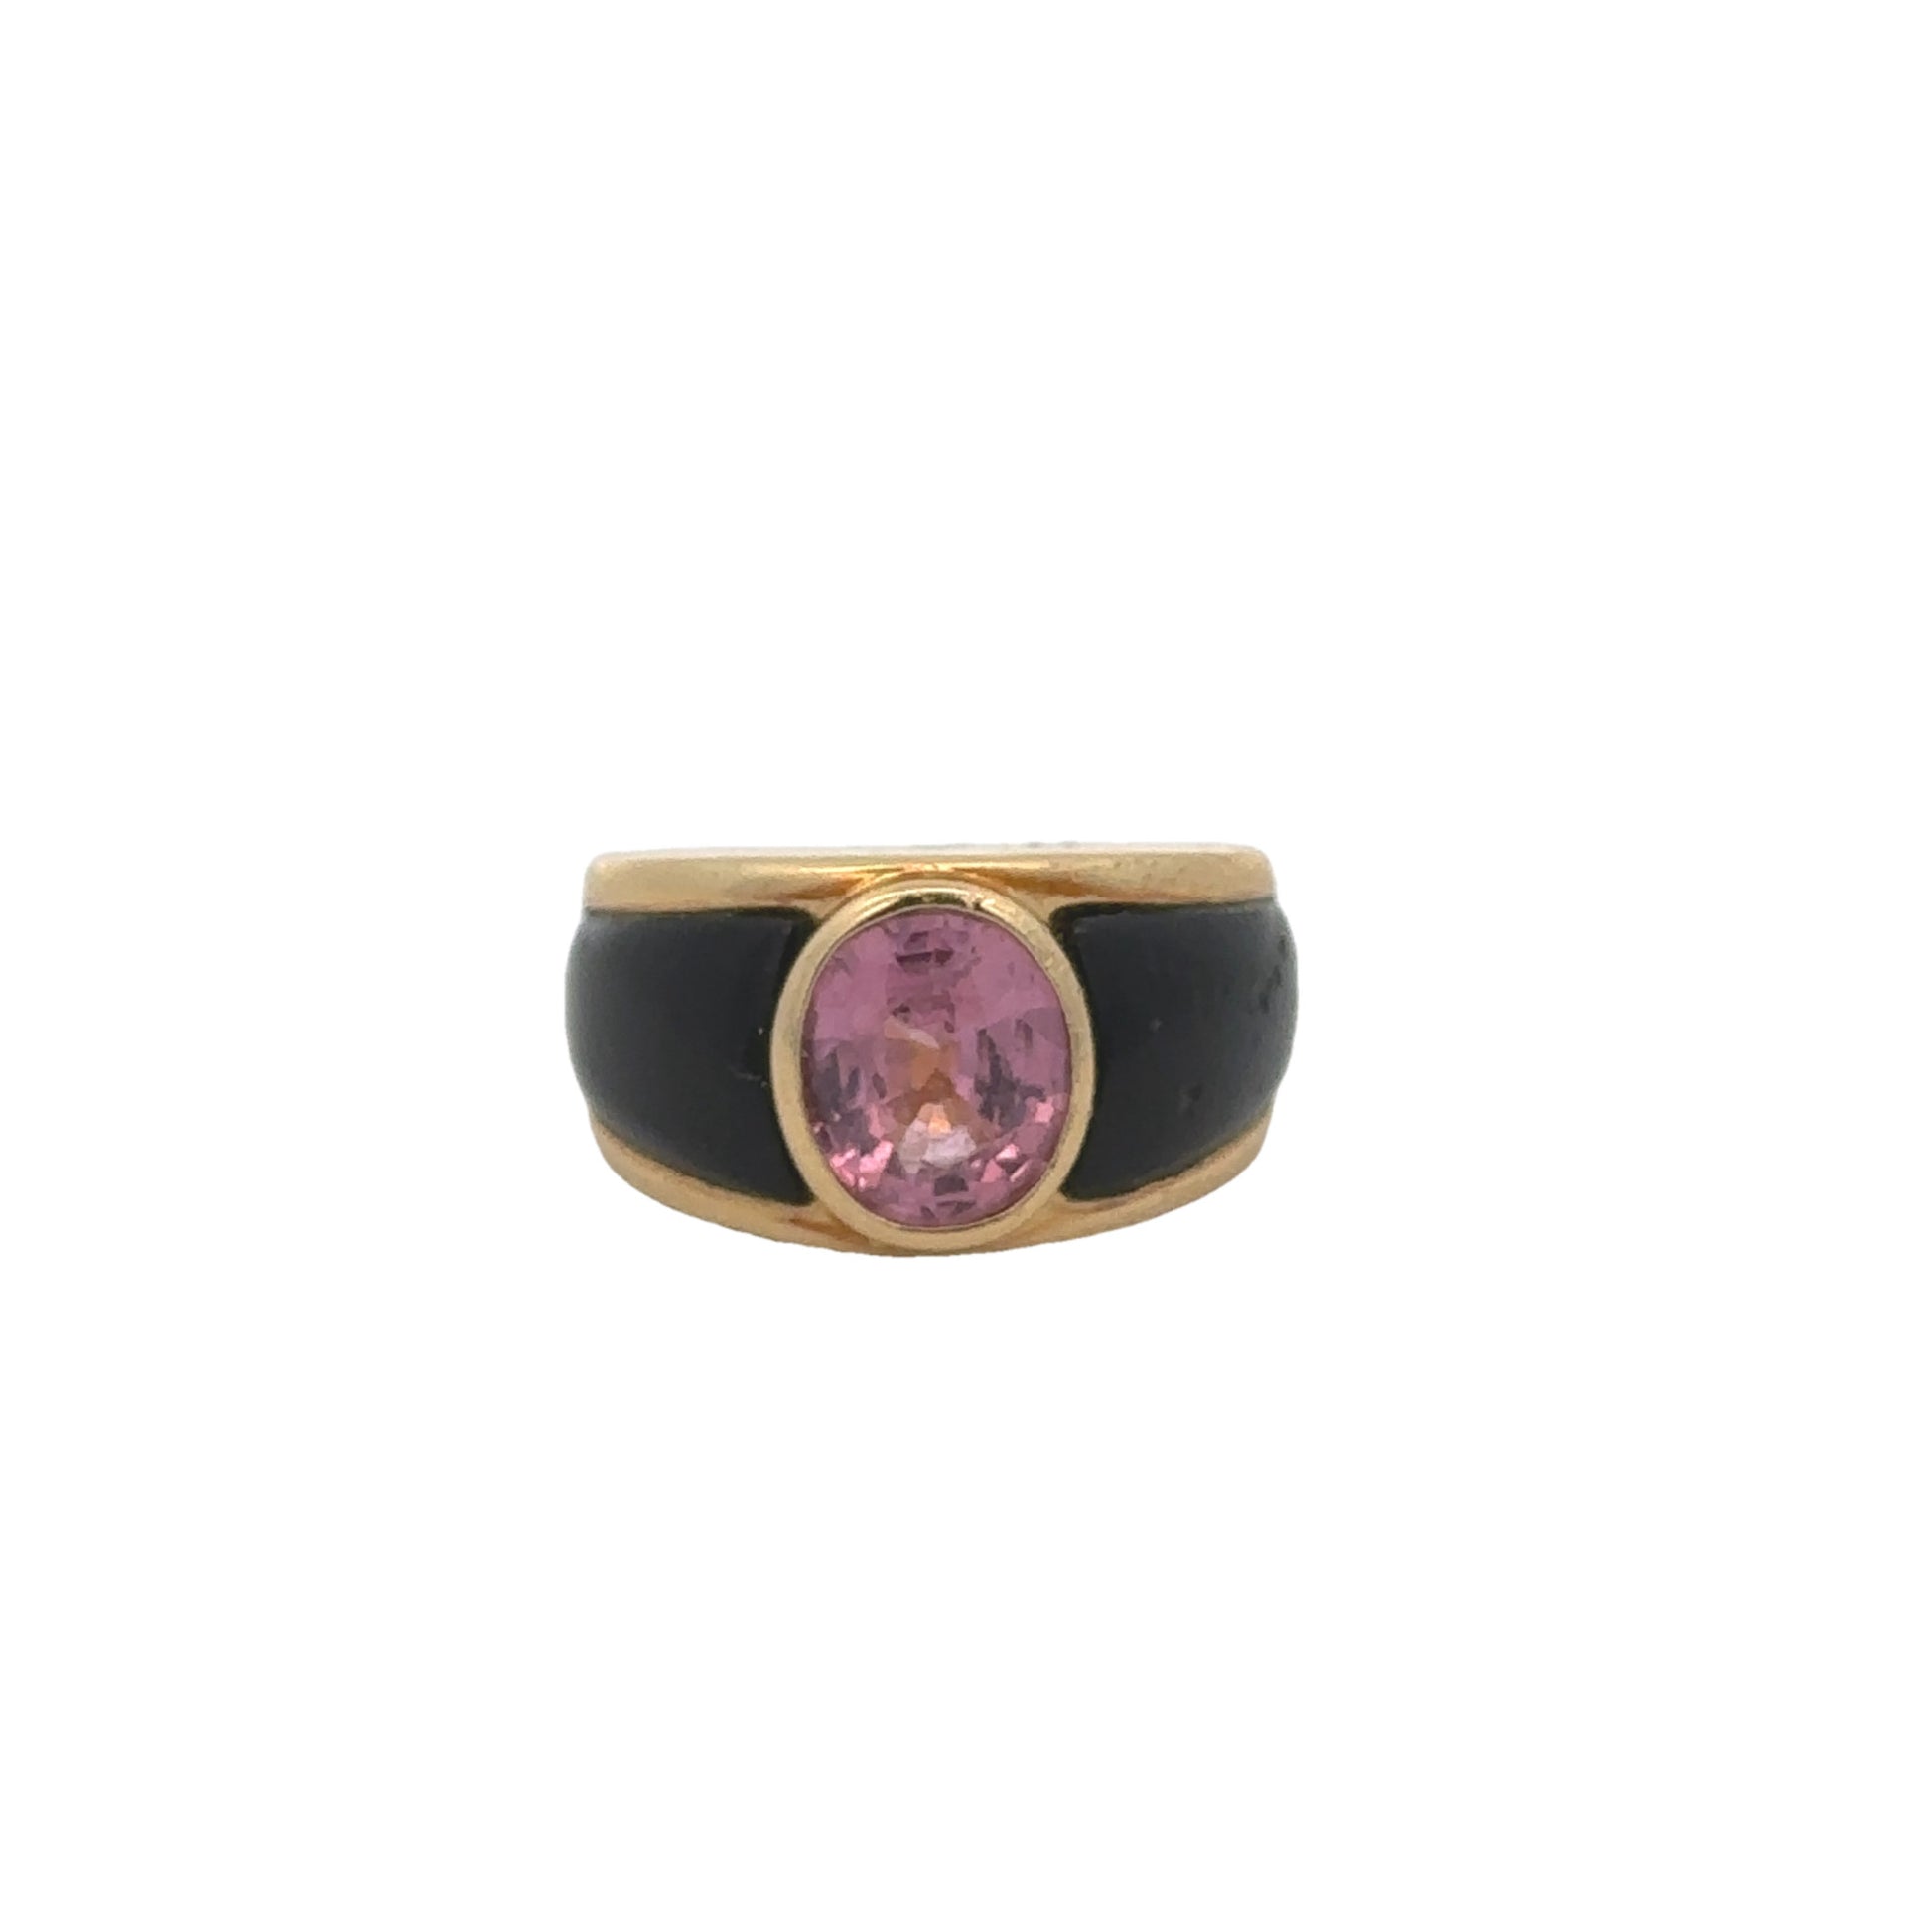 1970s 18KT Yellow Gold Pink Spinel & Enamel Ring front